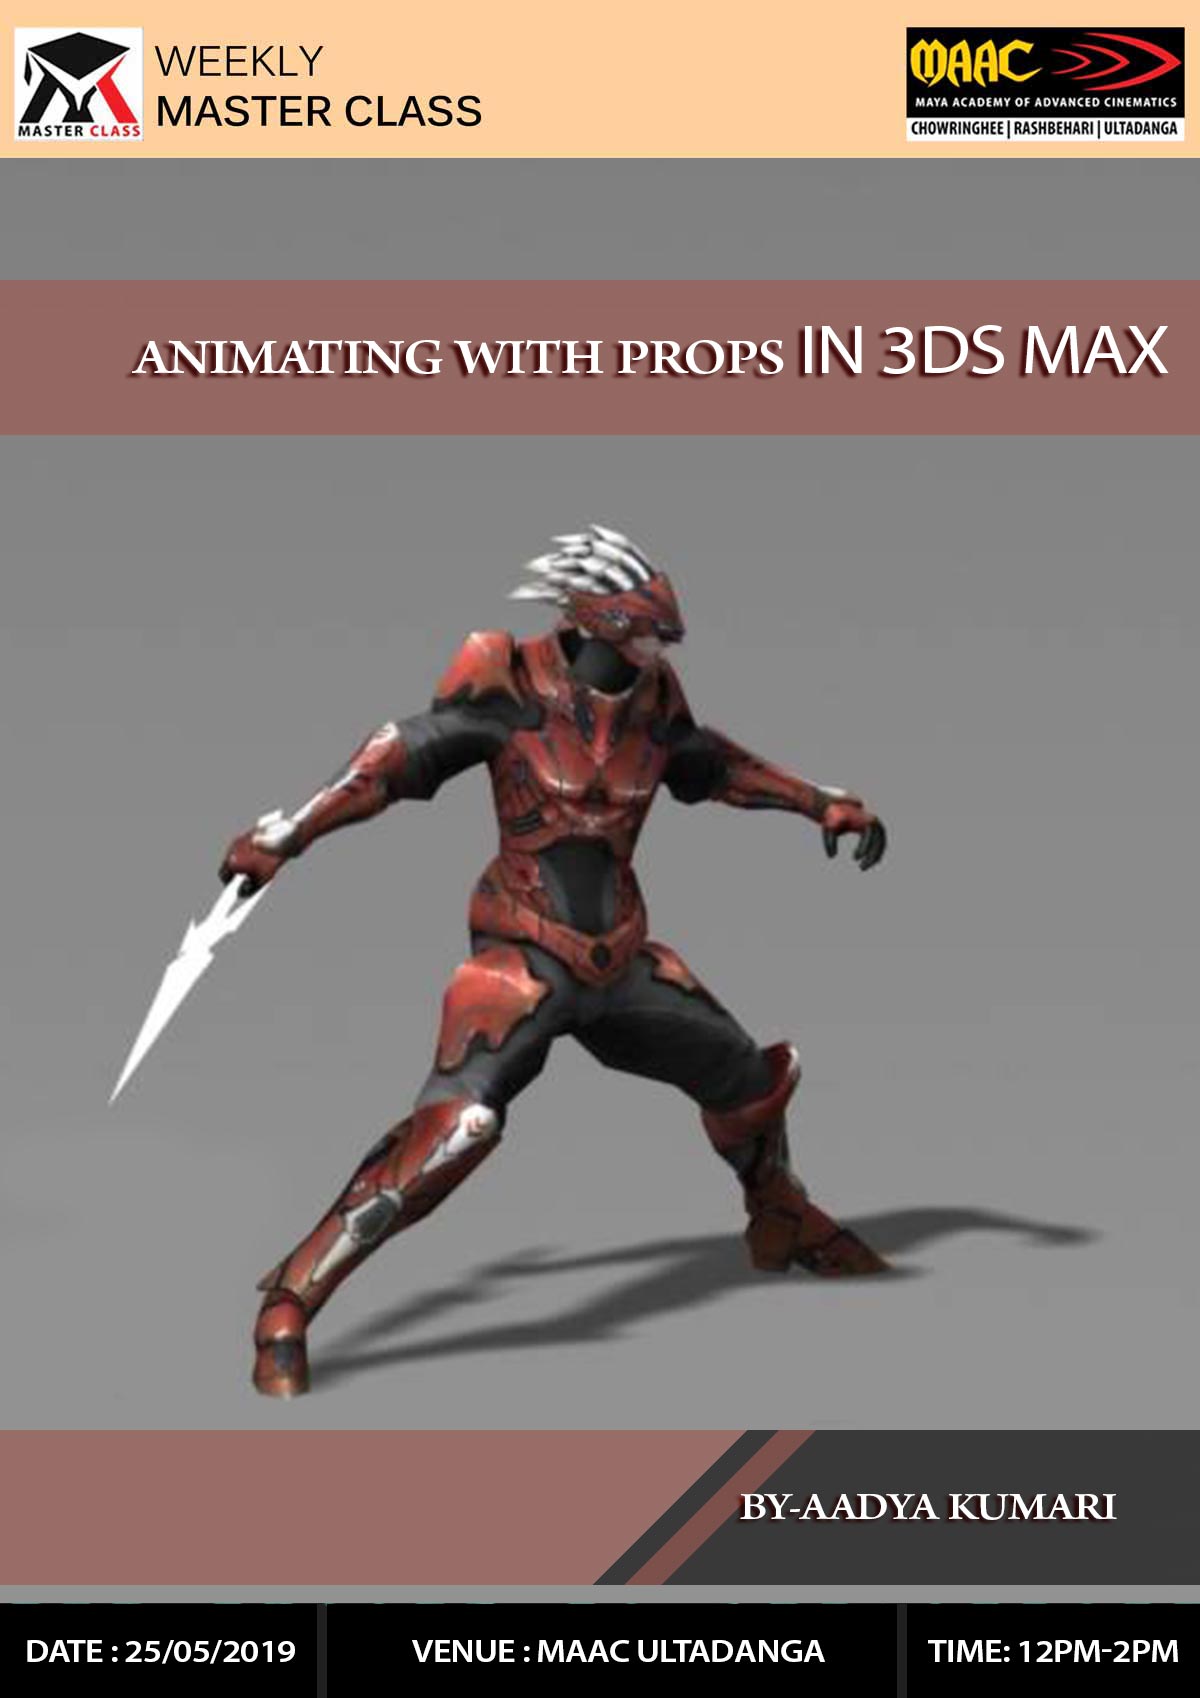 Weekly Master Class on Animating with Props in 3Ds Max